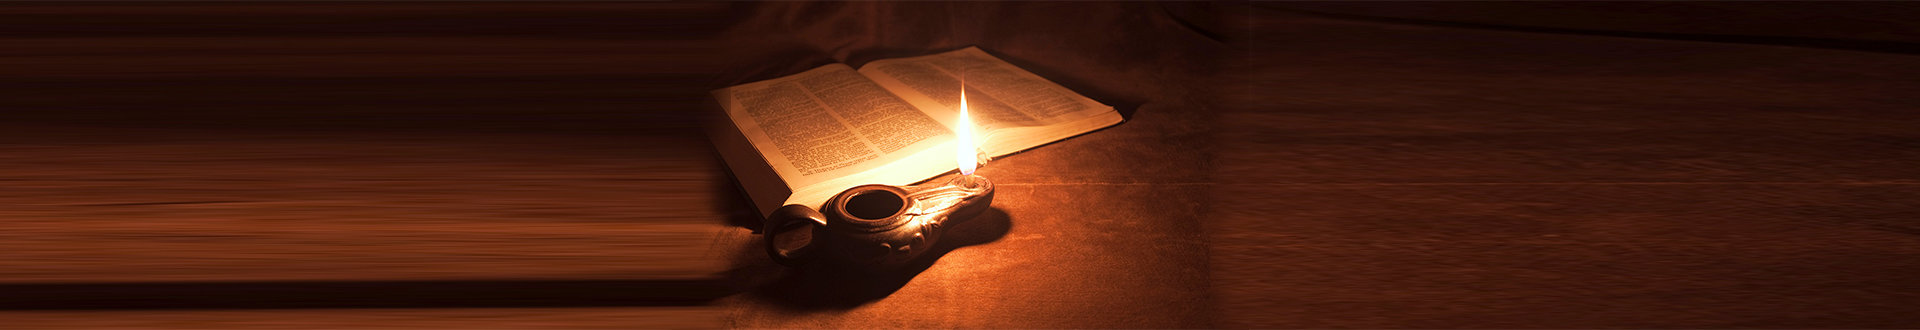 lamp and bible